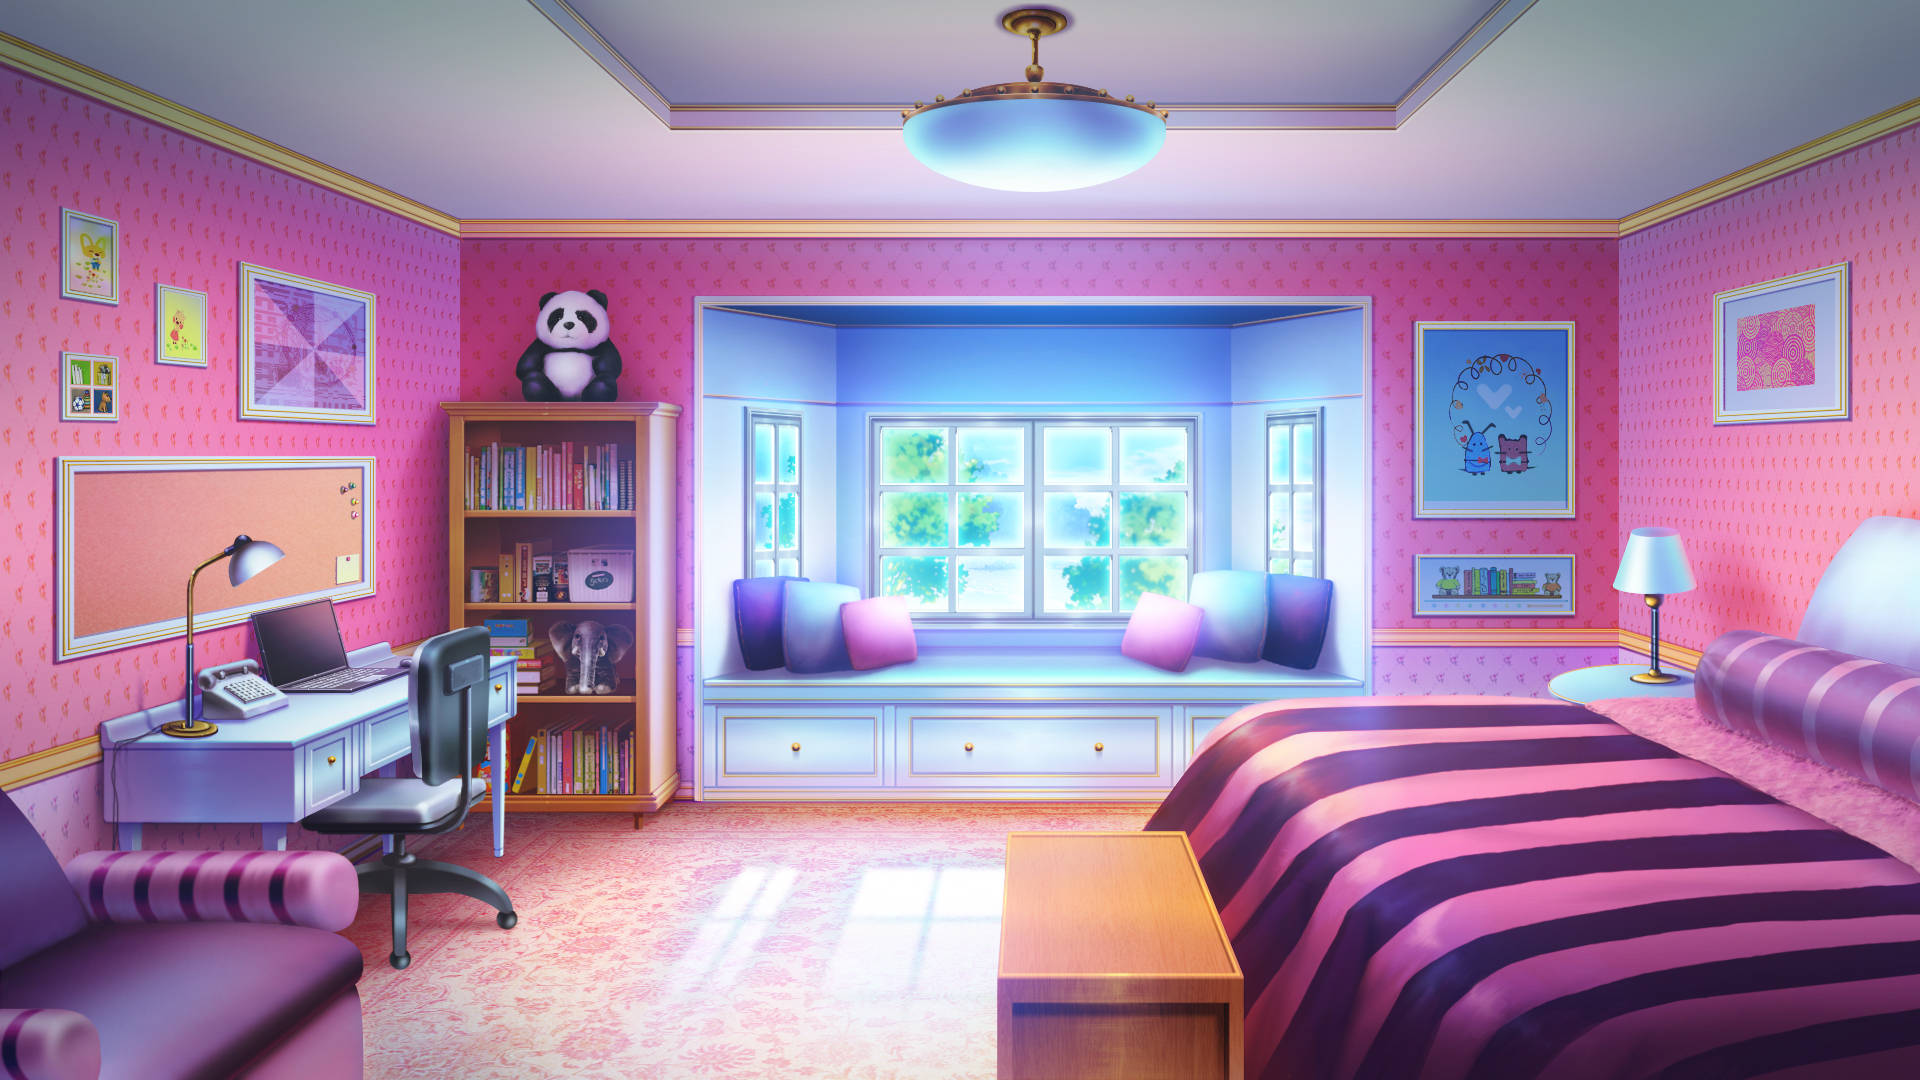 Free Anime Bedroom Wallpaper Downloads, [100+] Anime Bedroom Wallpapers for  FREE 